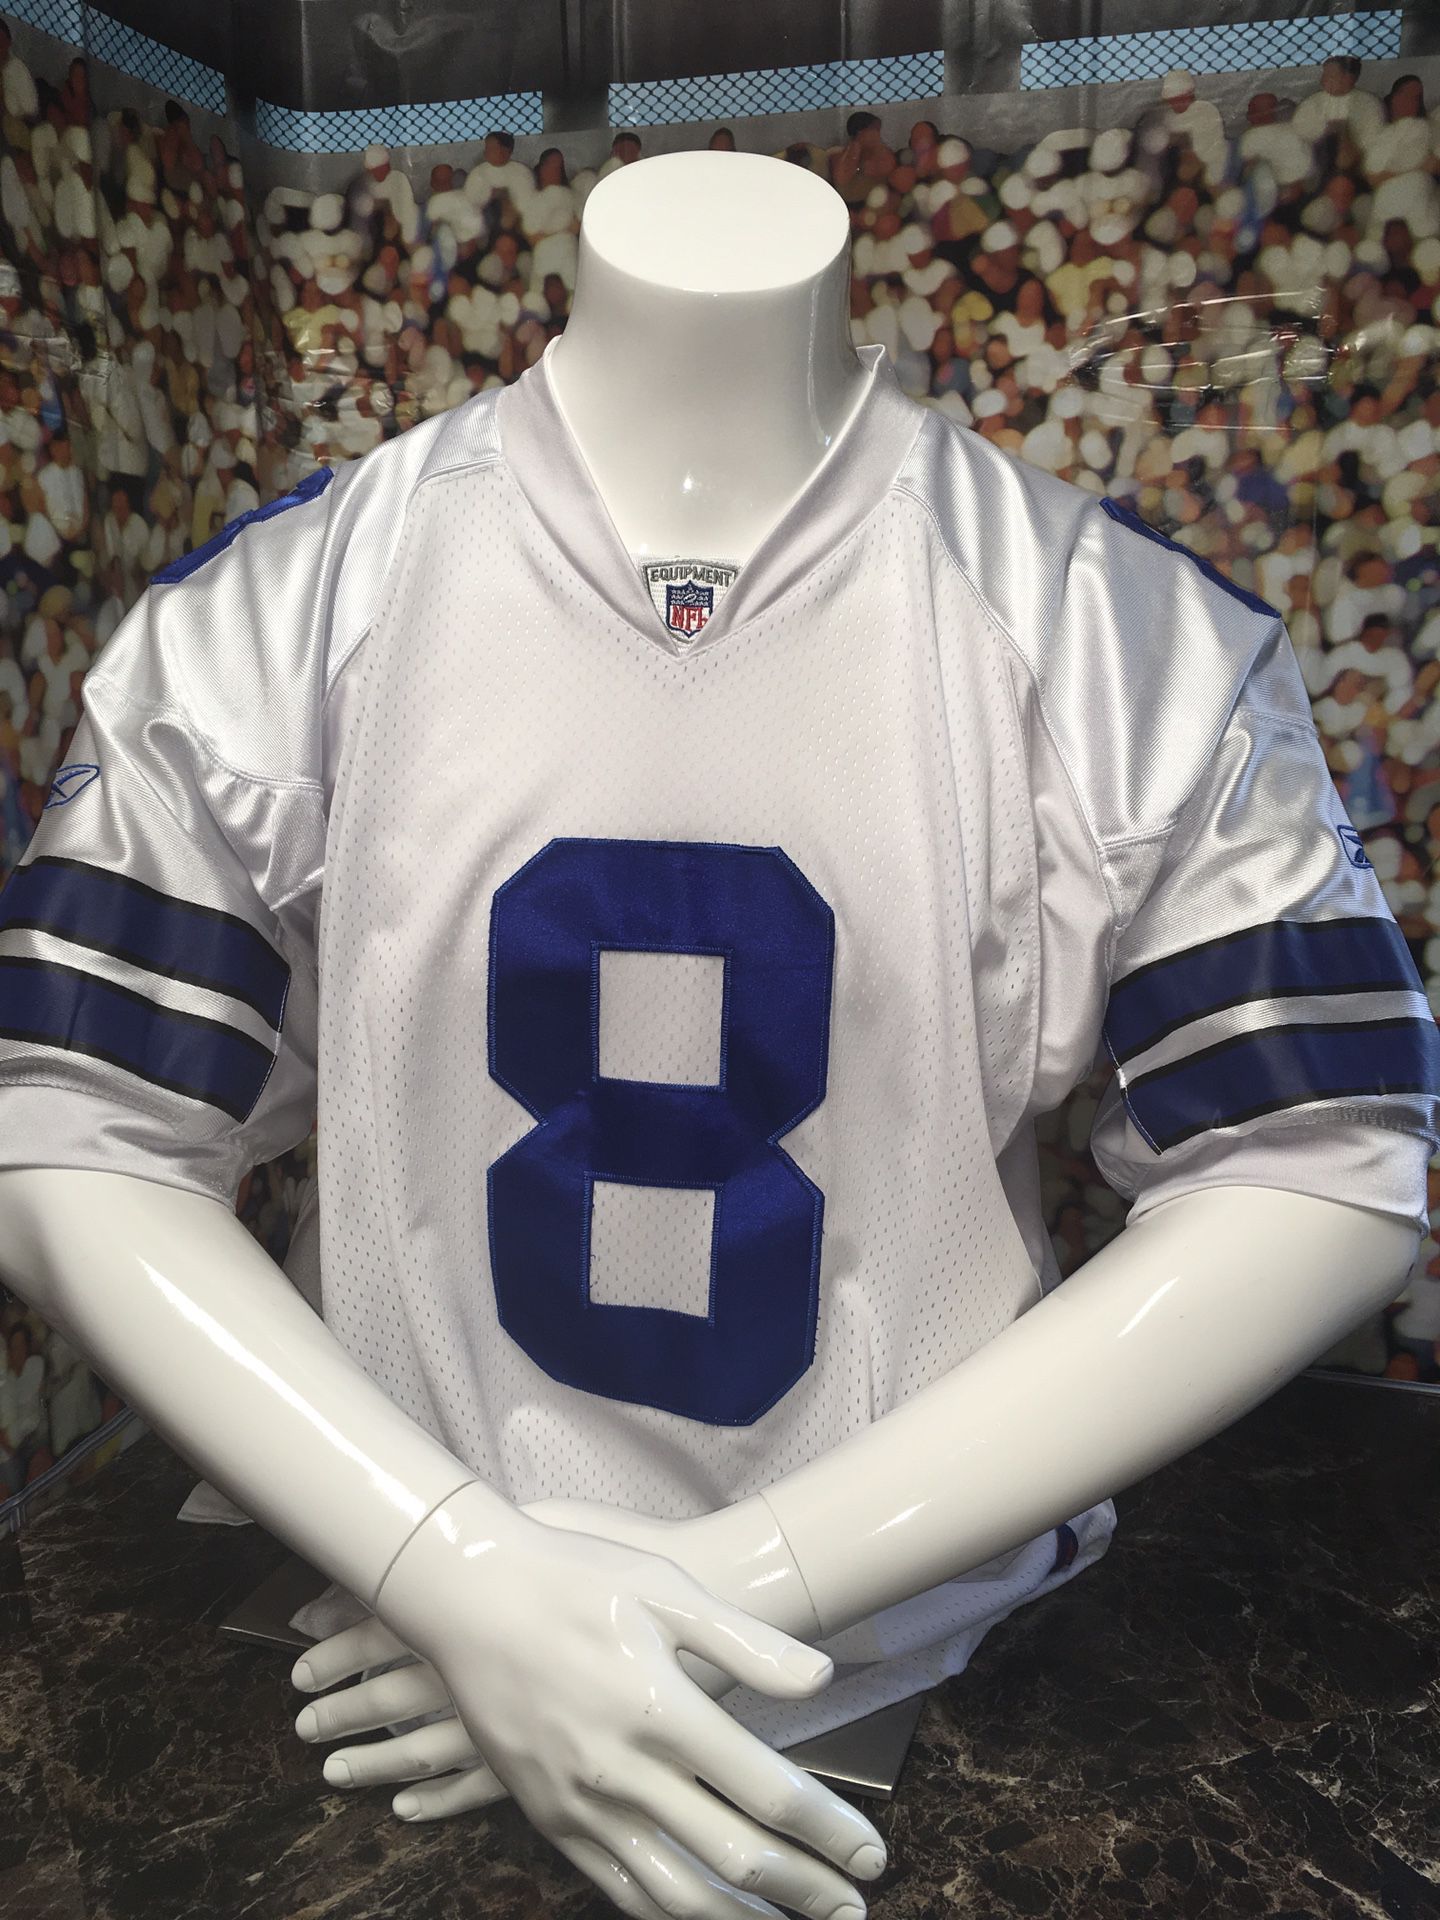 Reebok Authentic Troy Aikman Dallas Cowboys Jersey Sz 52 (2XL) Pre-owned Minimal signs of wear No rips, tears or stains Please see photos